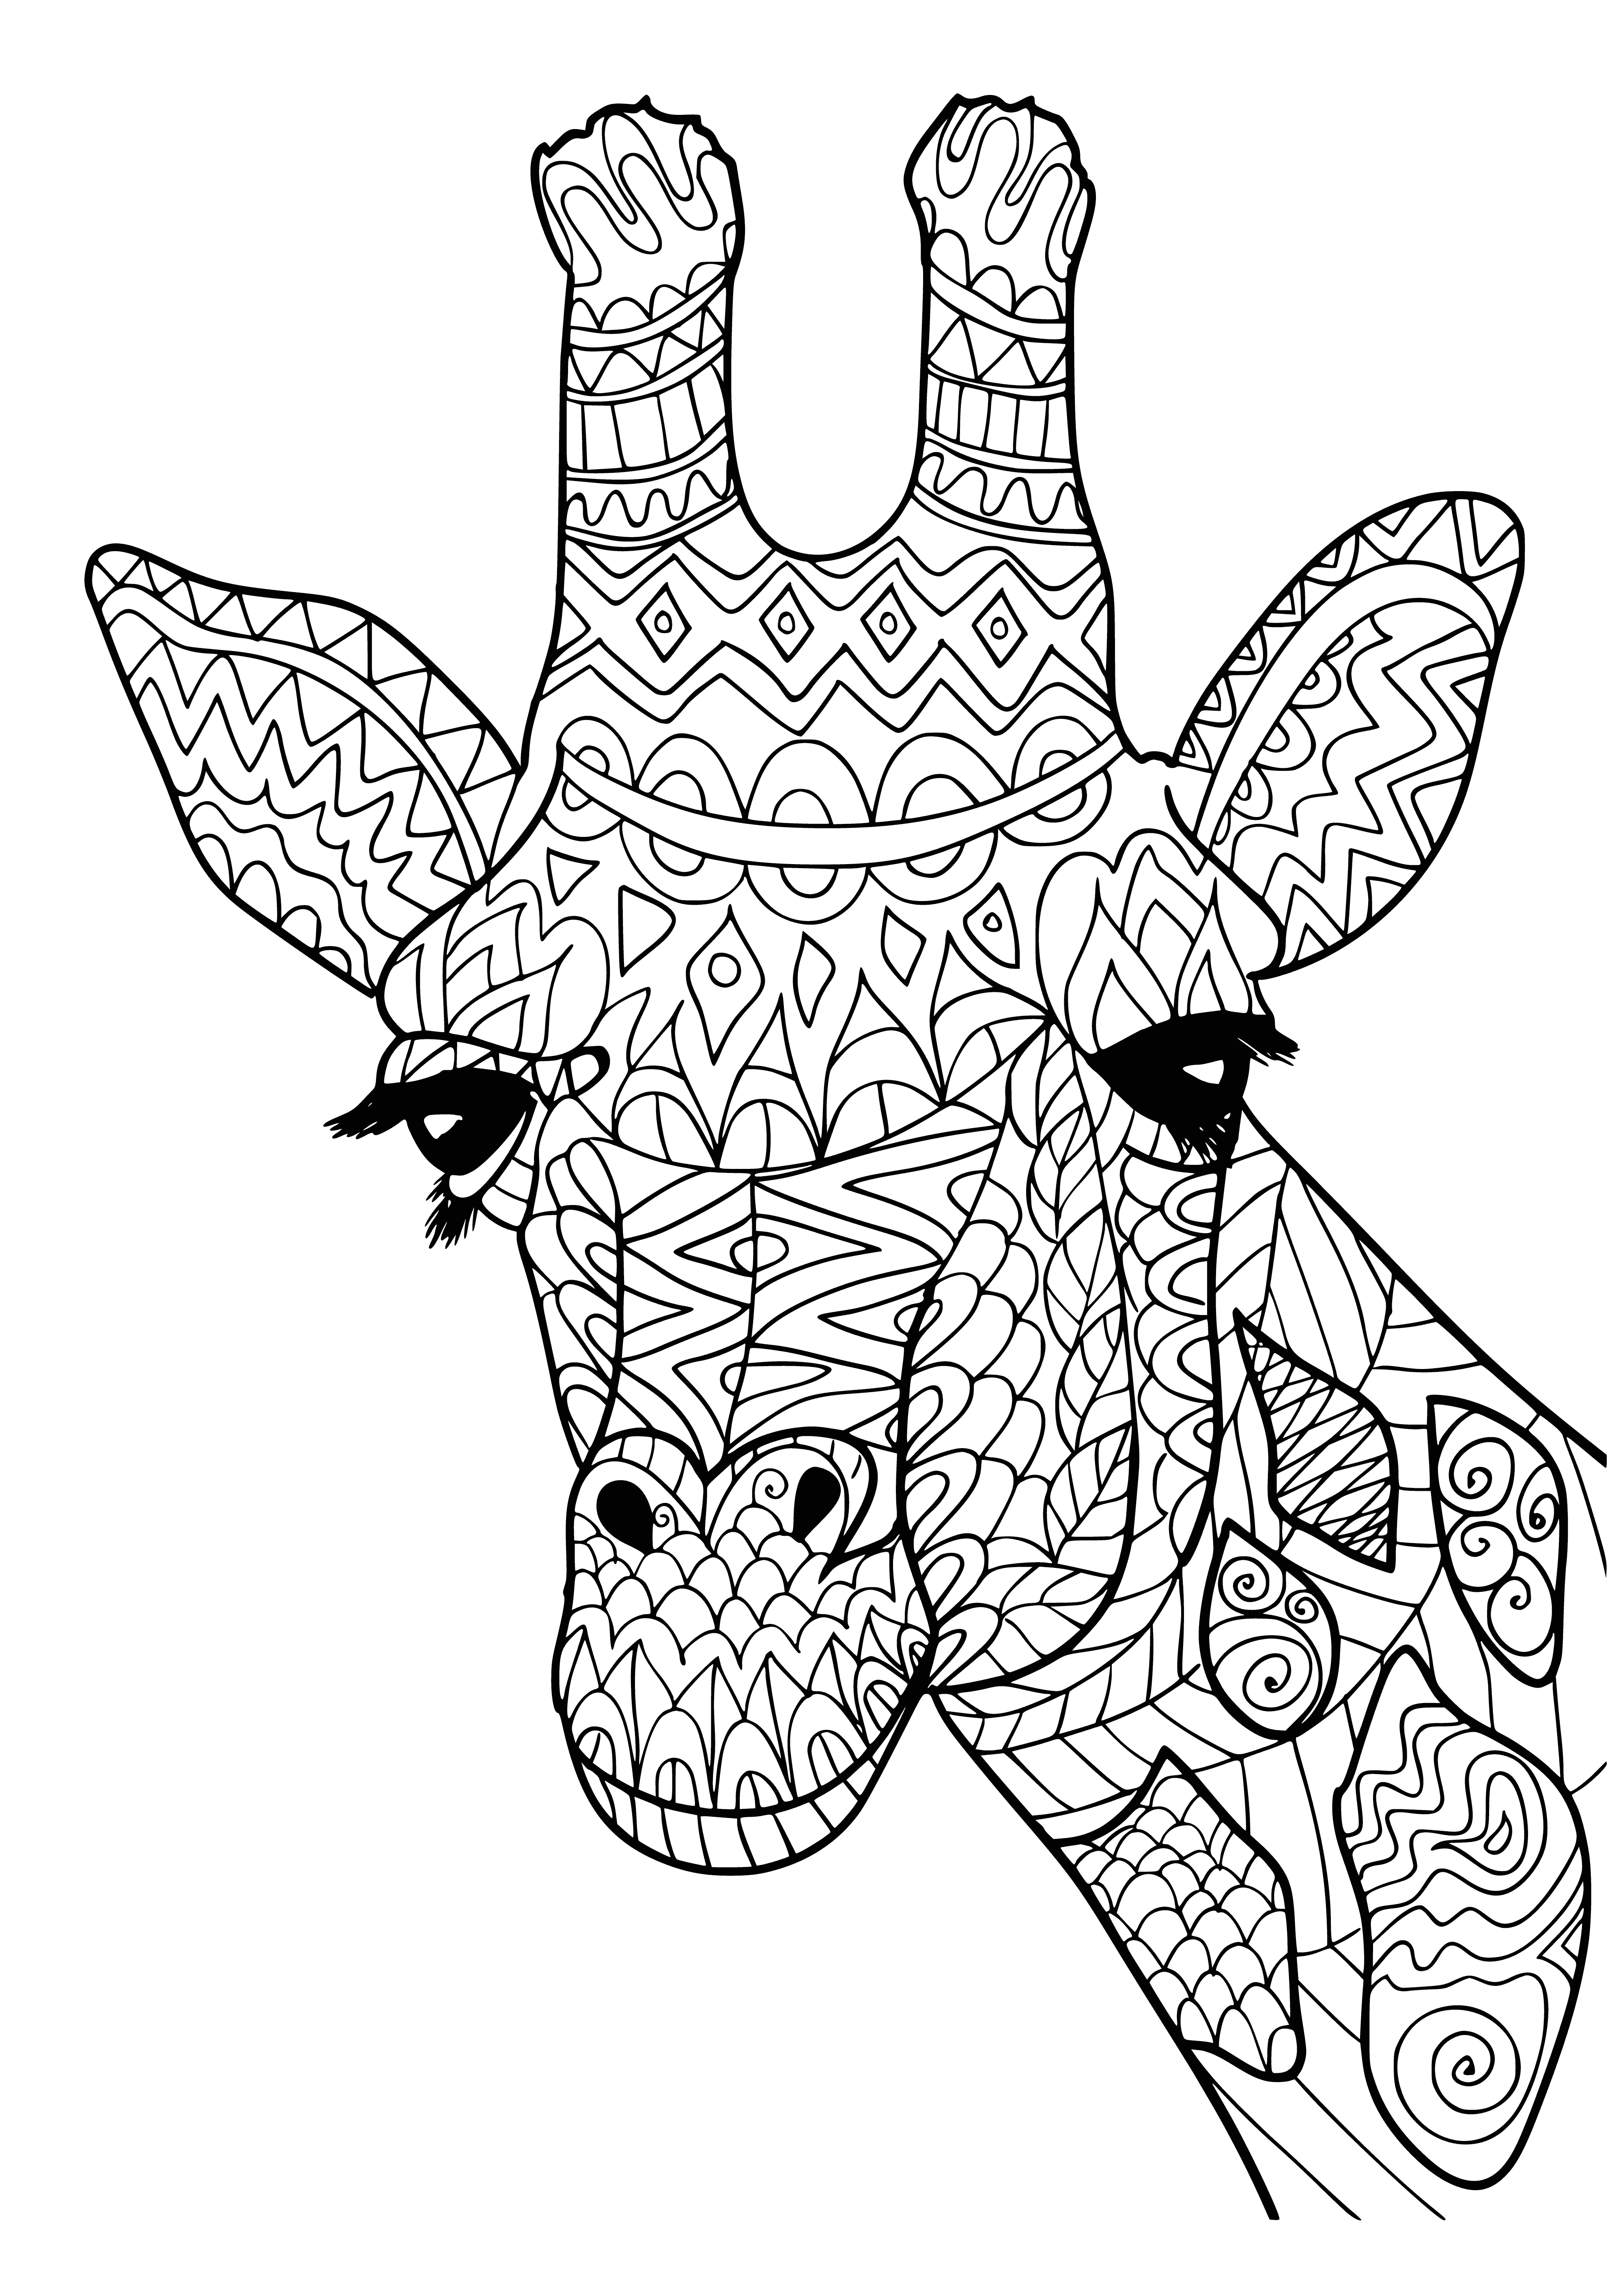 coloring page: Enjoy coloring a giraffe, a long-necked mammal with spots on its fur, against a backdrop of white and trees. #giraffe #coloring